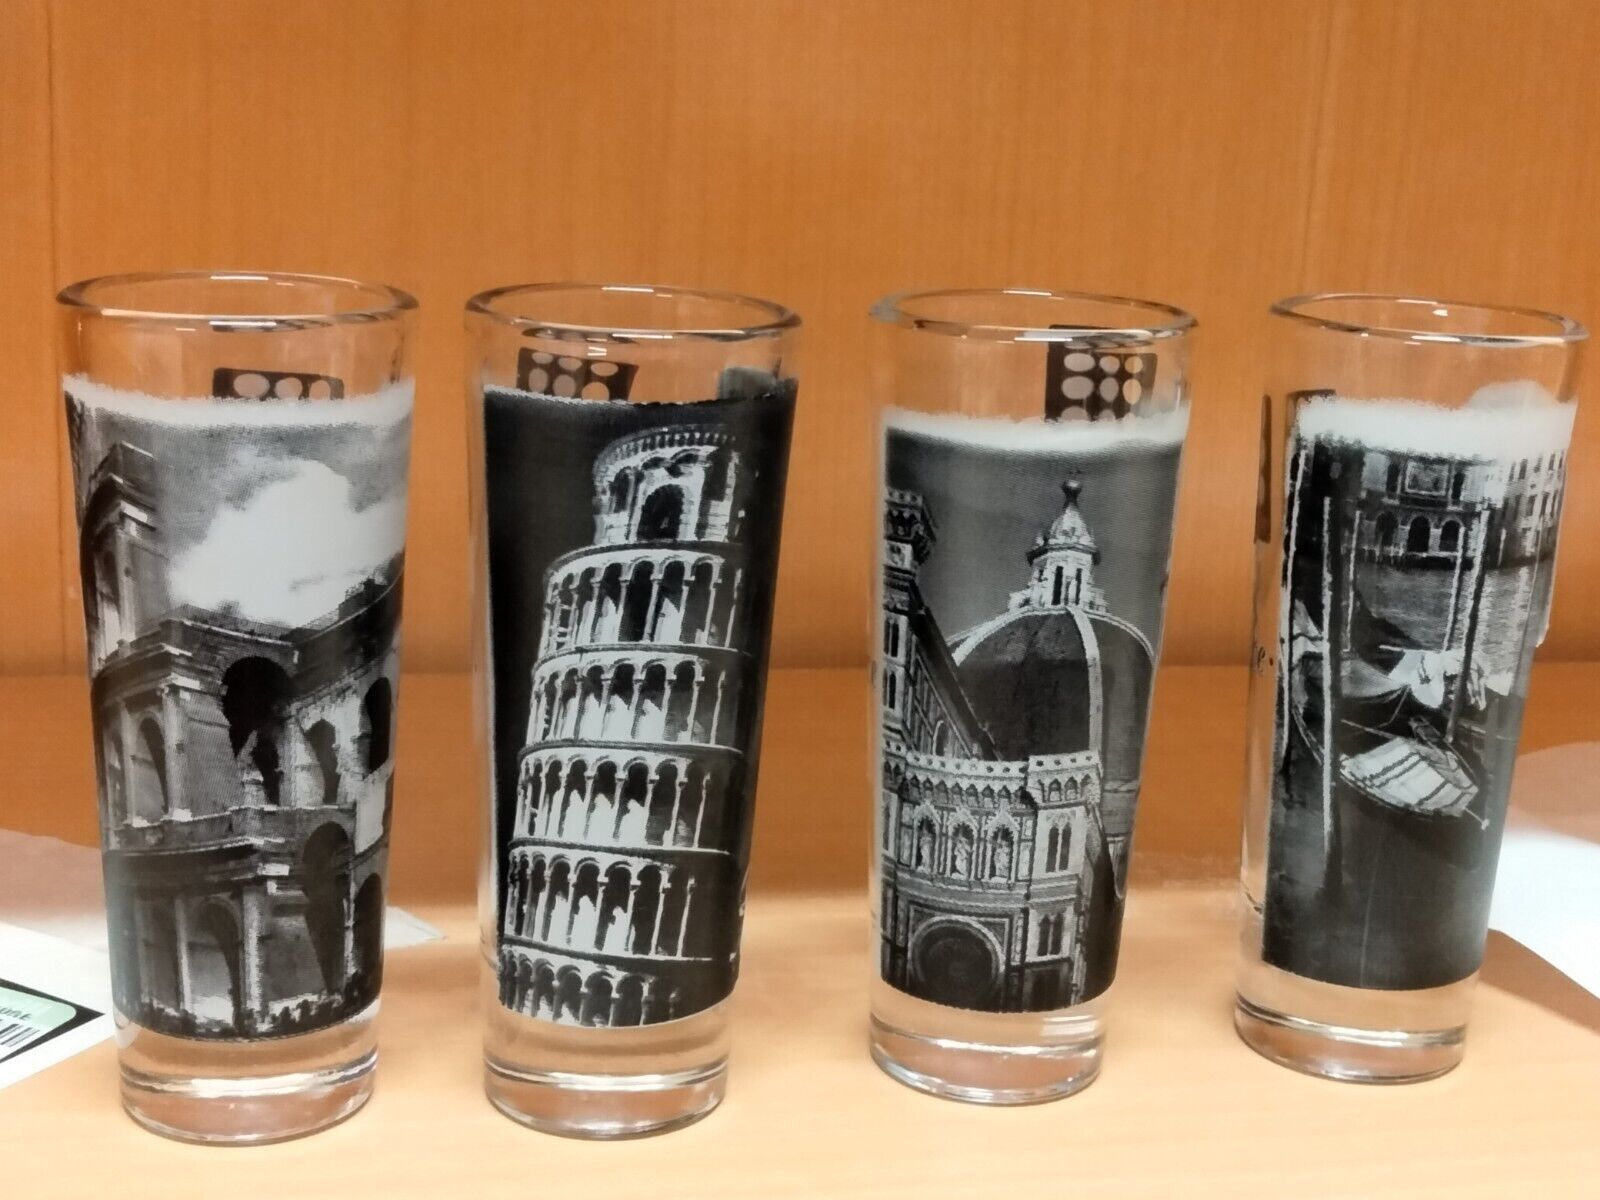 New Shot Glasses 4 Circleware Made In Italy  Each Depicks Different Italian Site